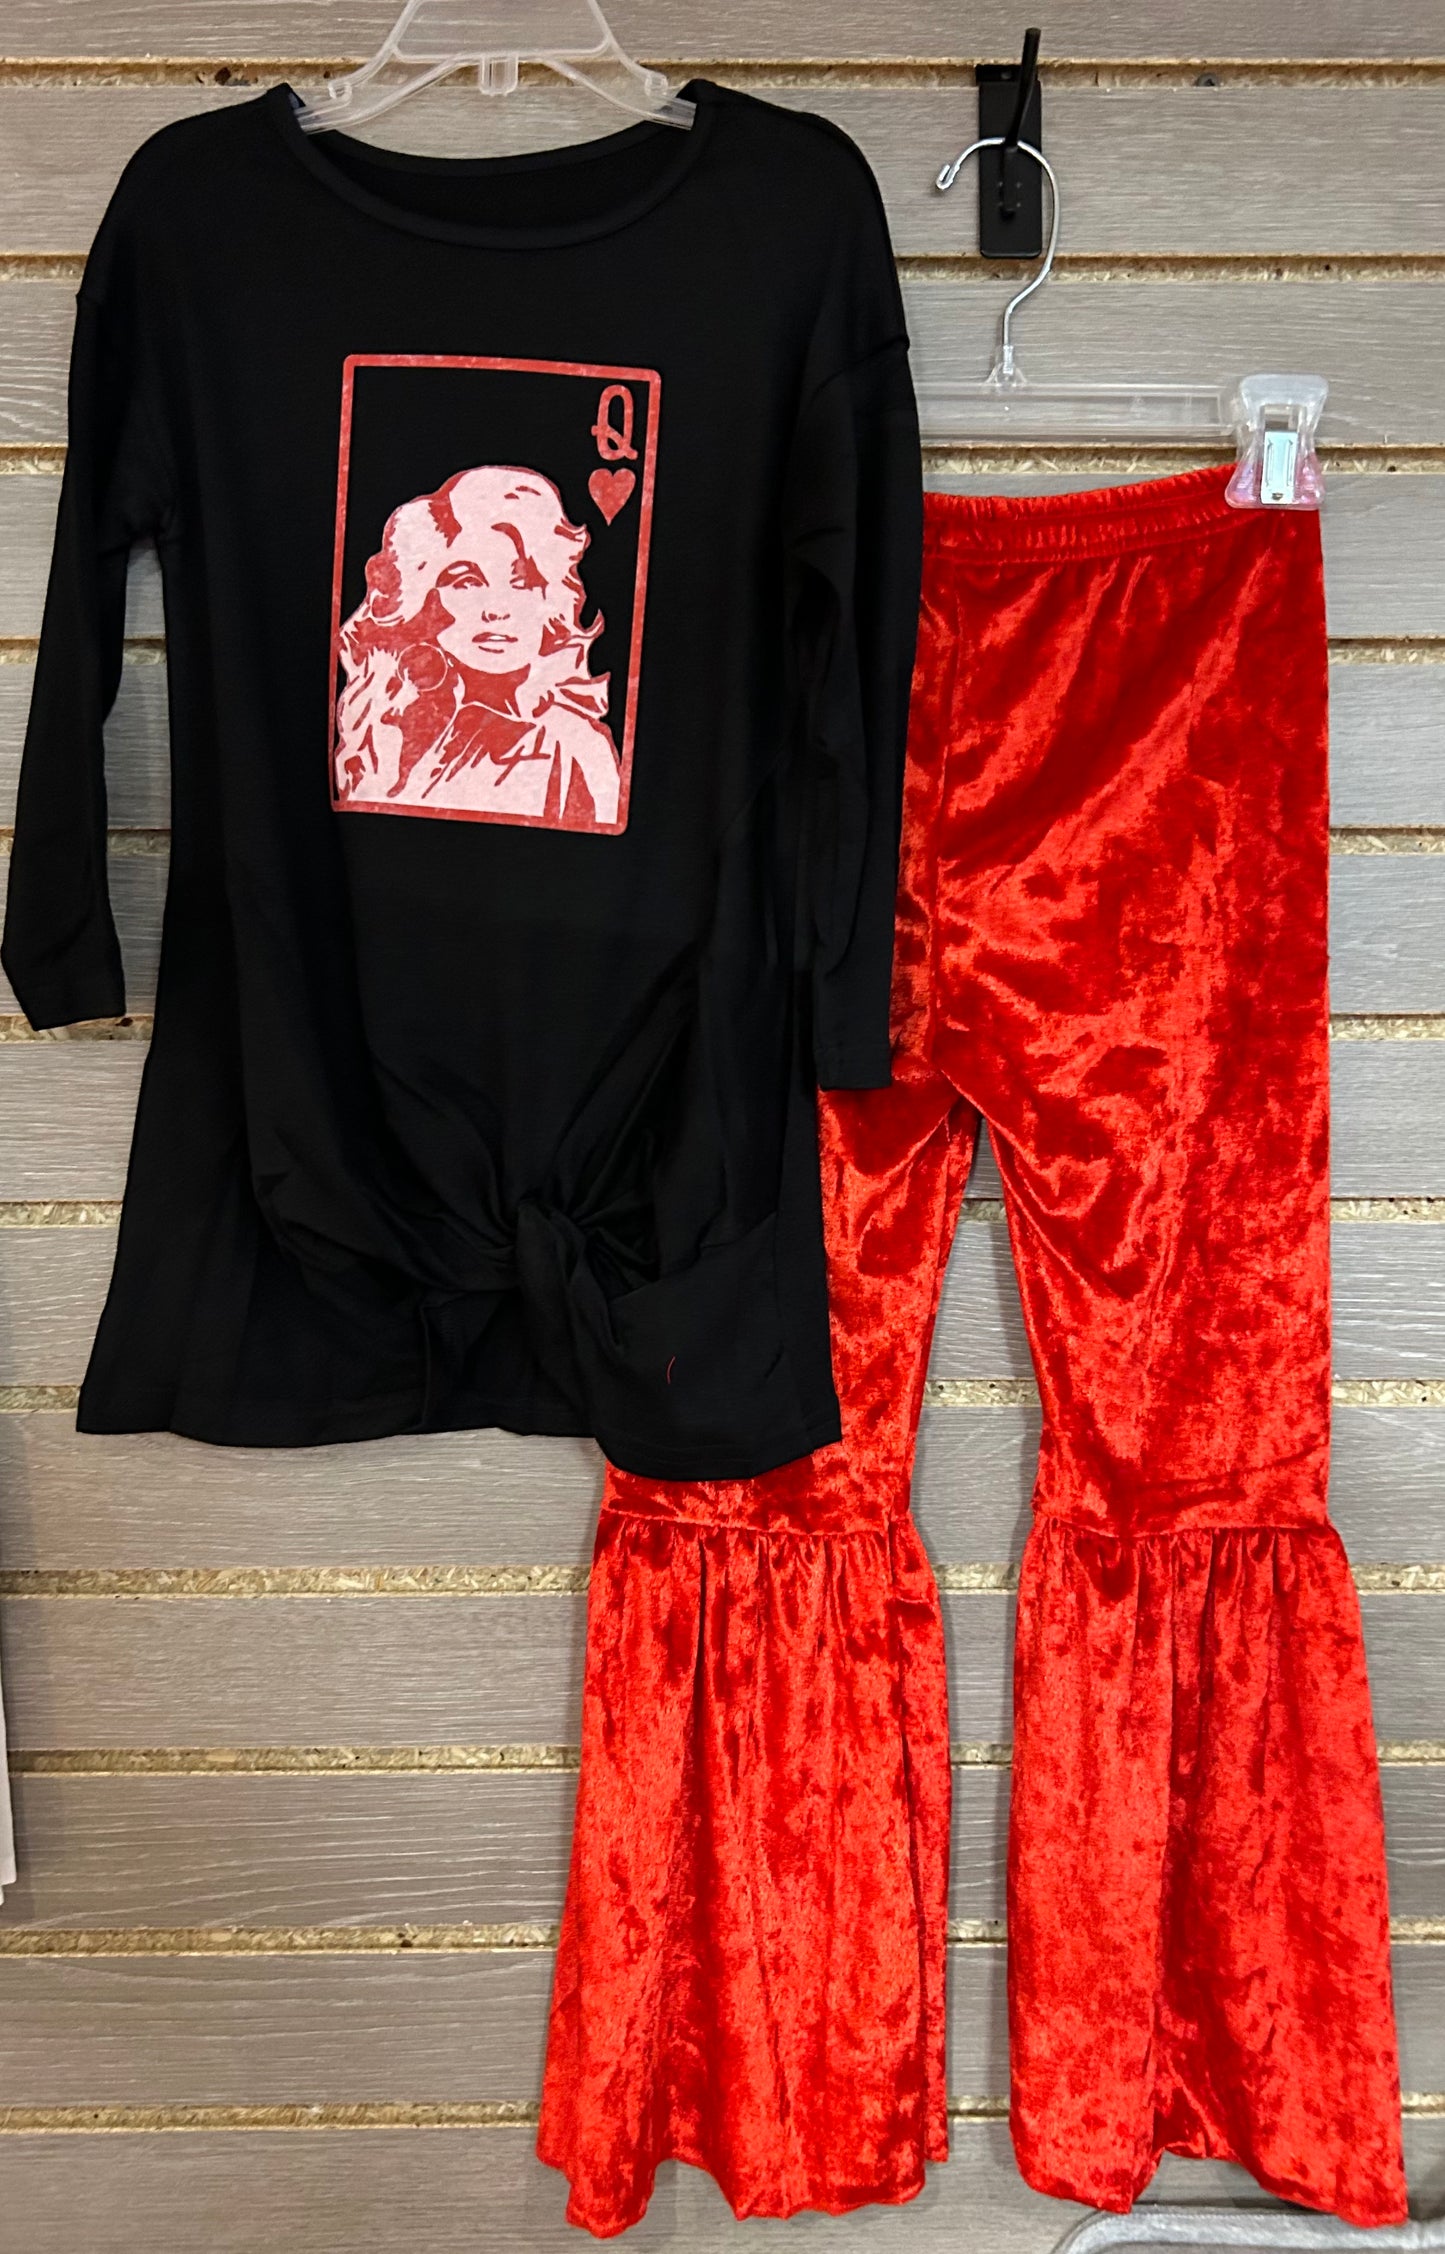 Queen Dolly of Hearts Outfit